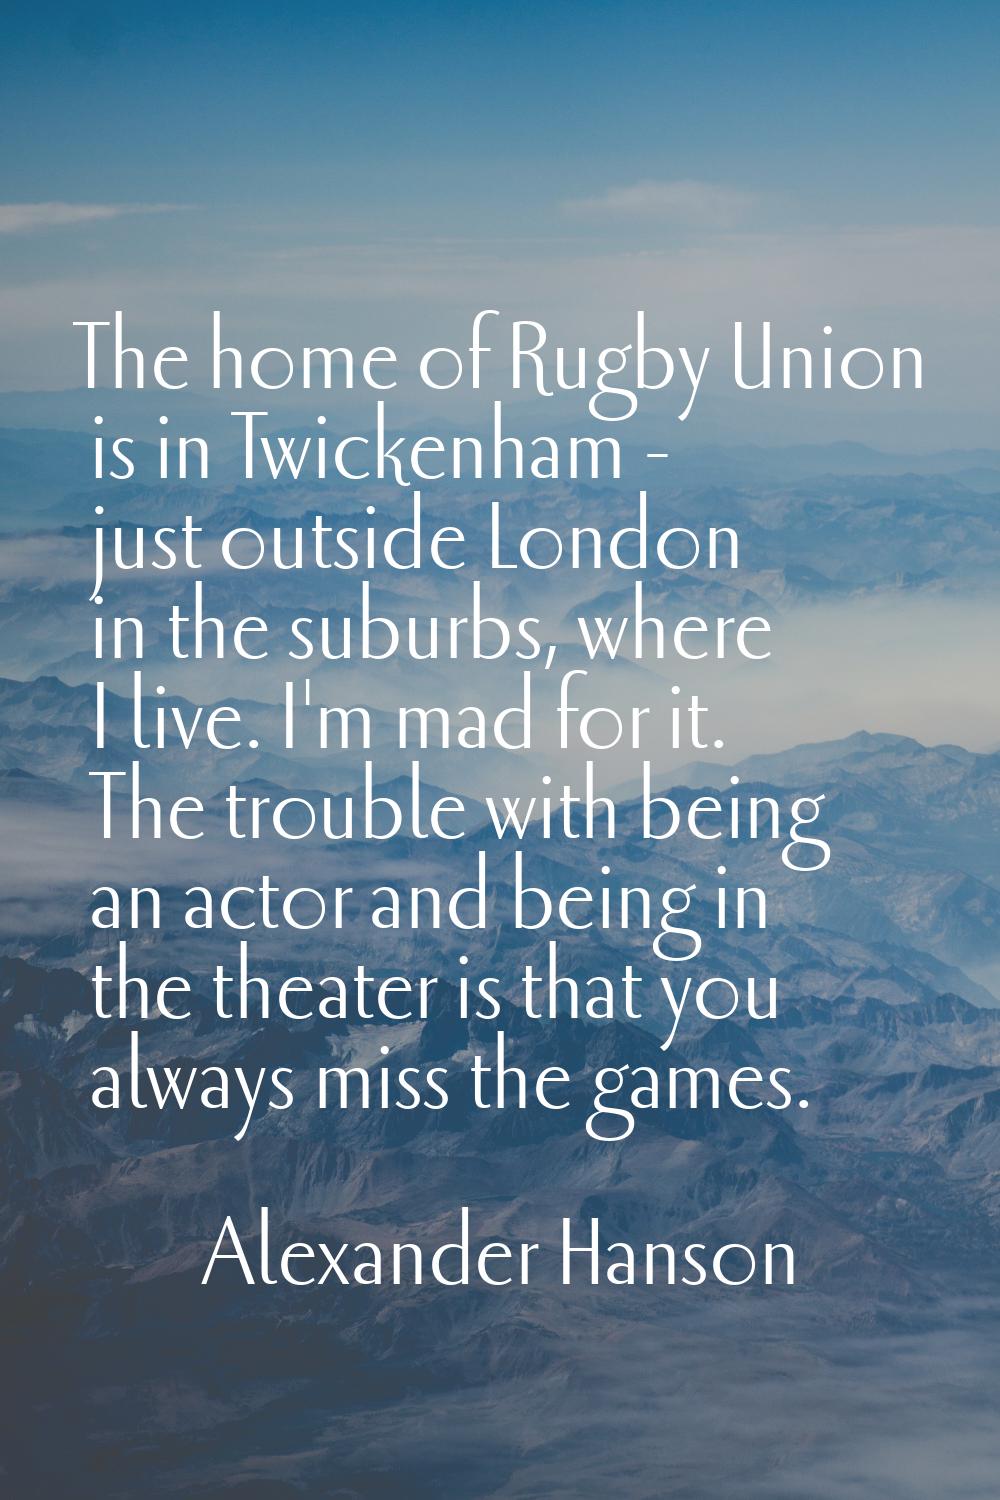 The home of Rugby Union is in Twickenham - just outside London in the suburbs, where I live. I'm ma